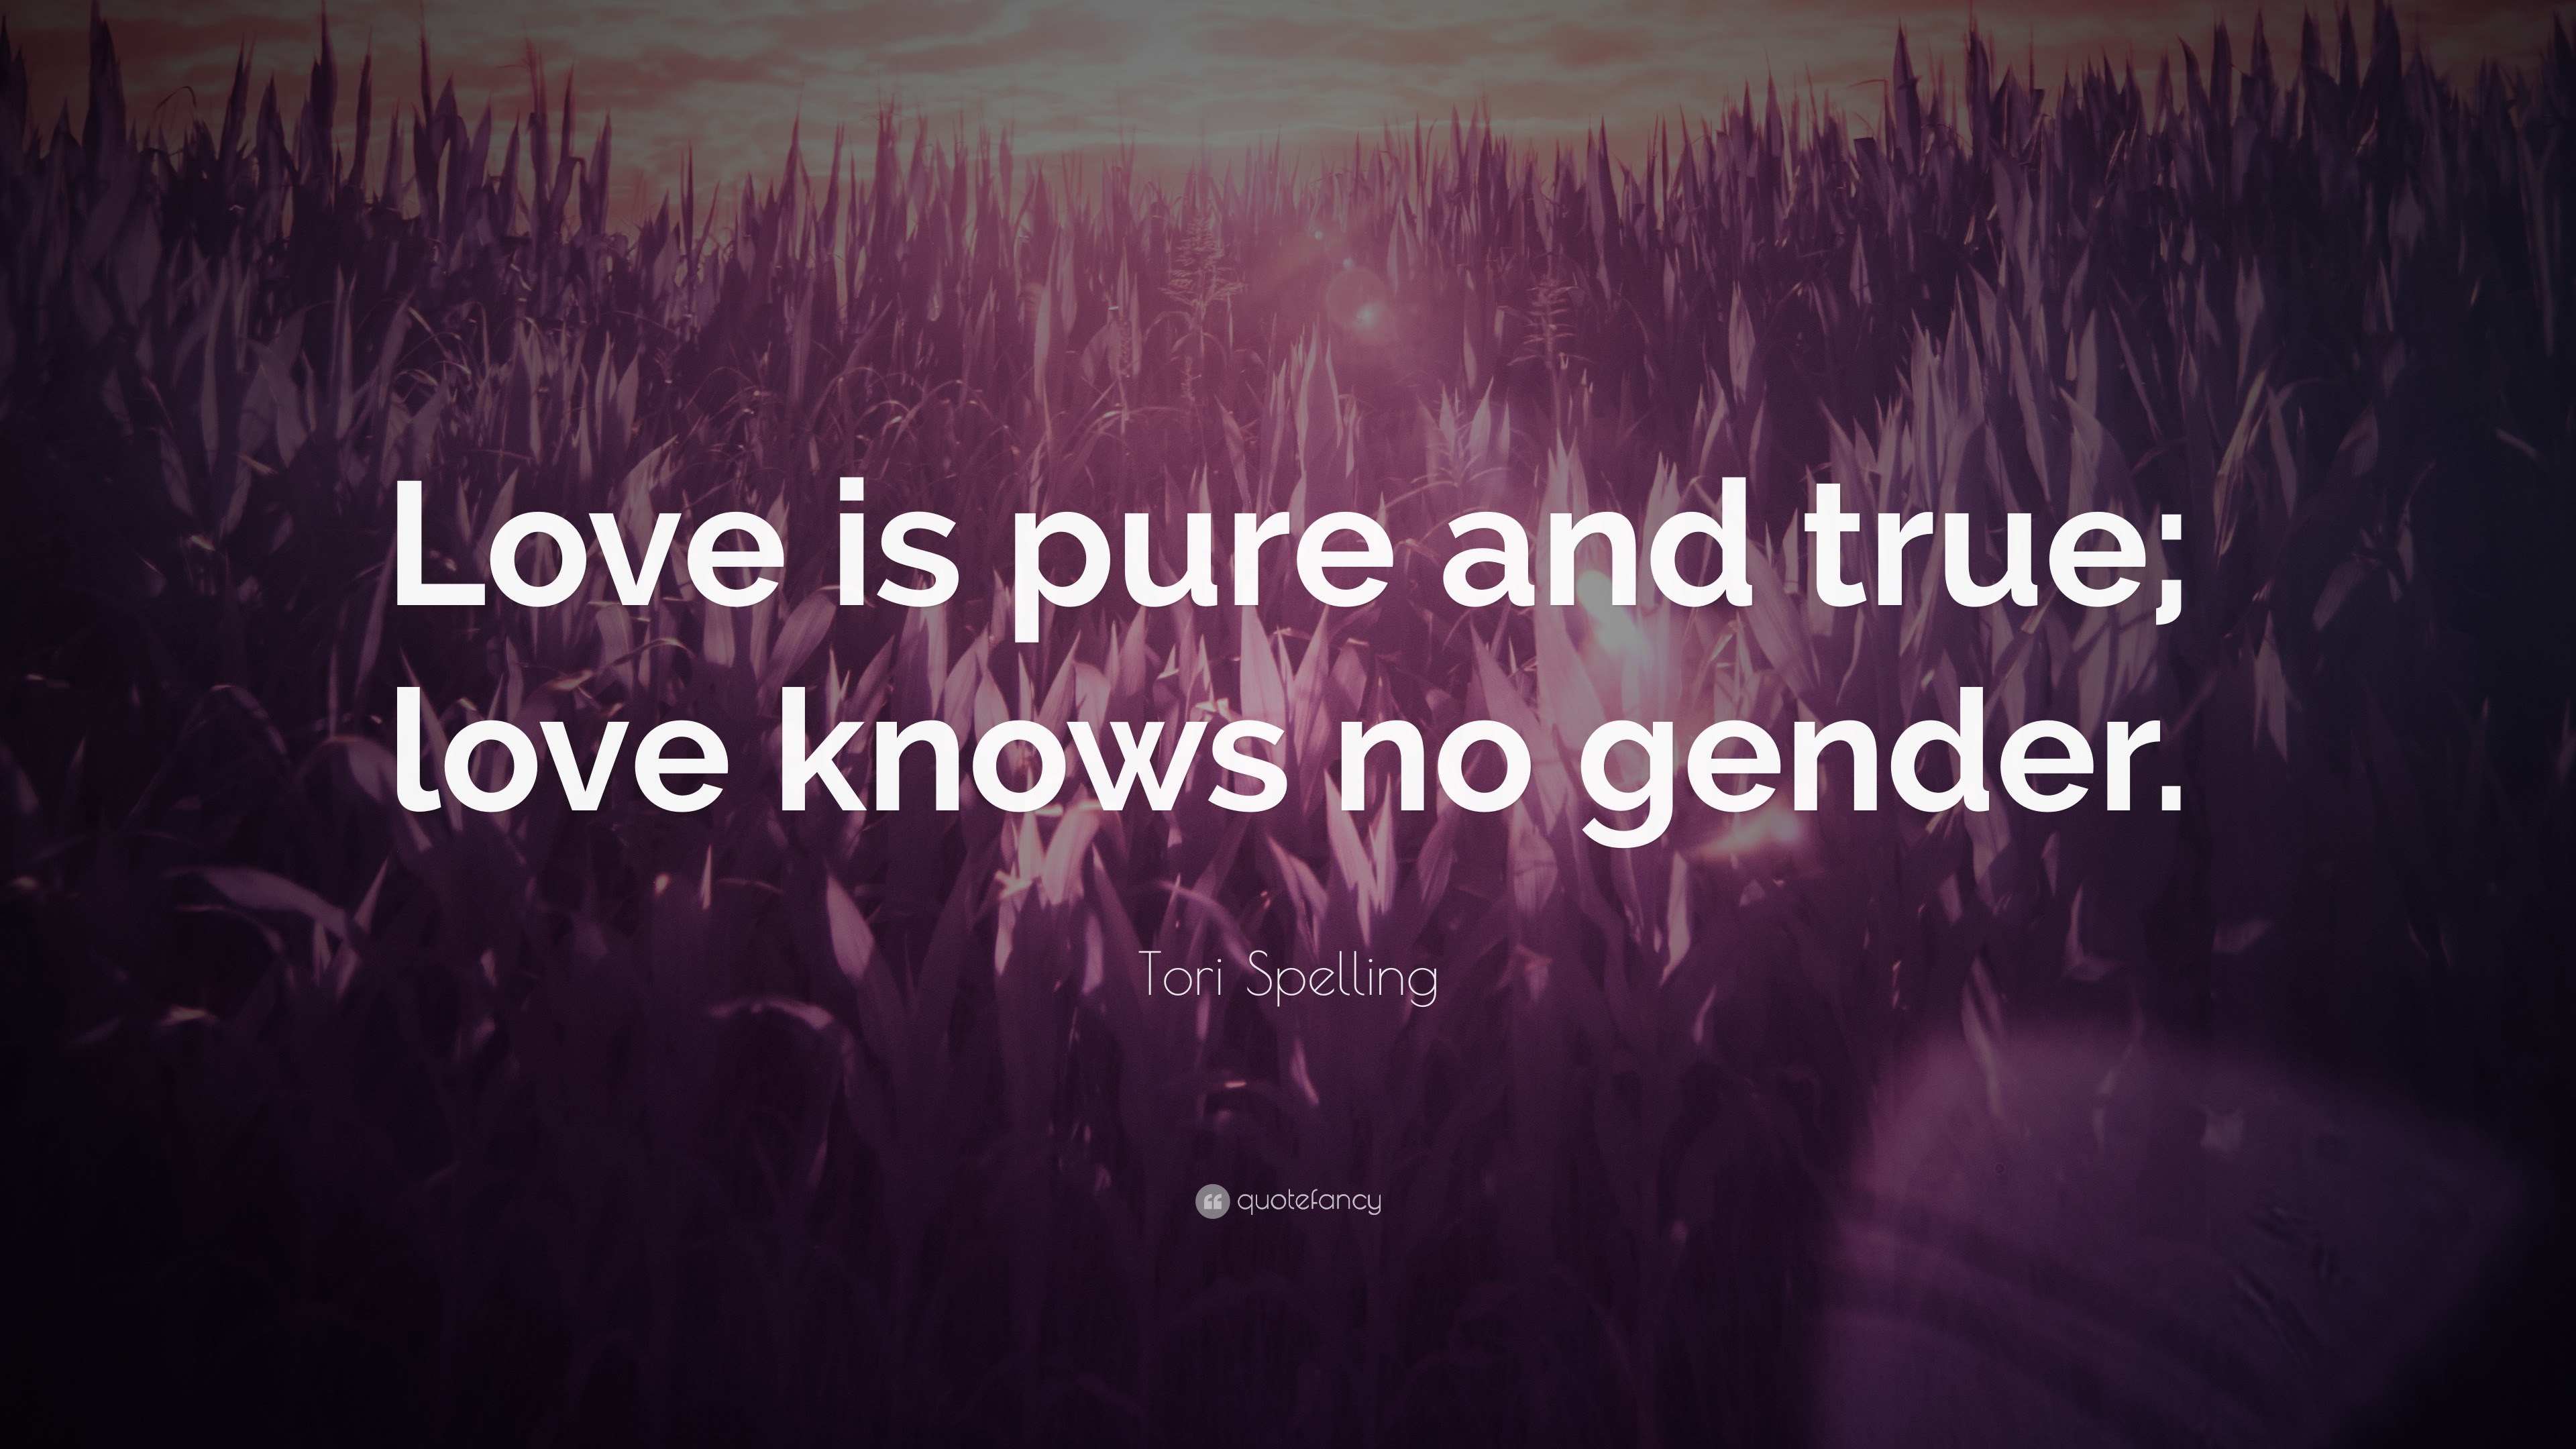 Tori Spelling Quote “Love is pure and true love knows no gender